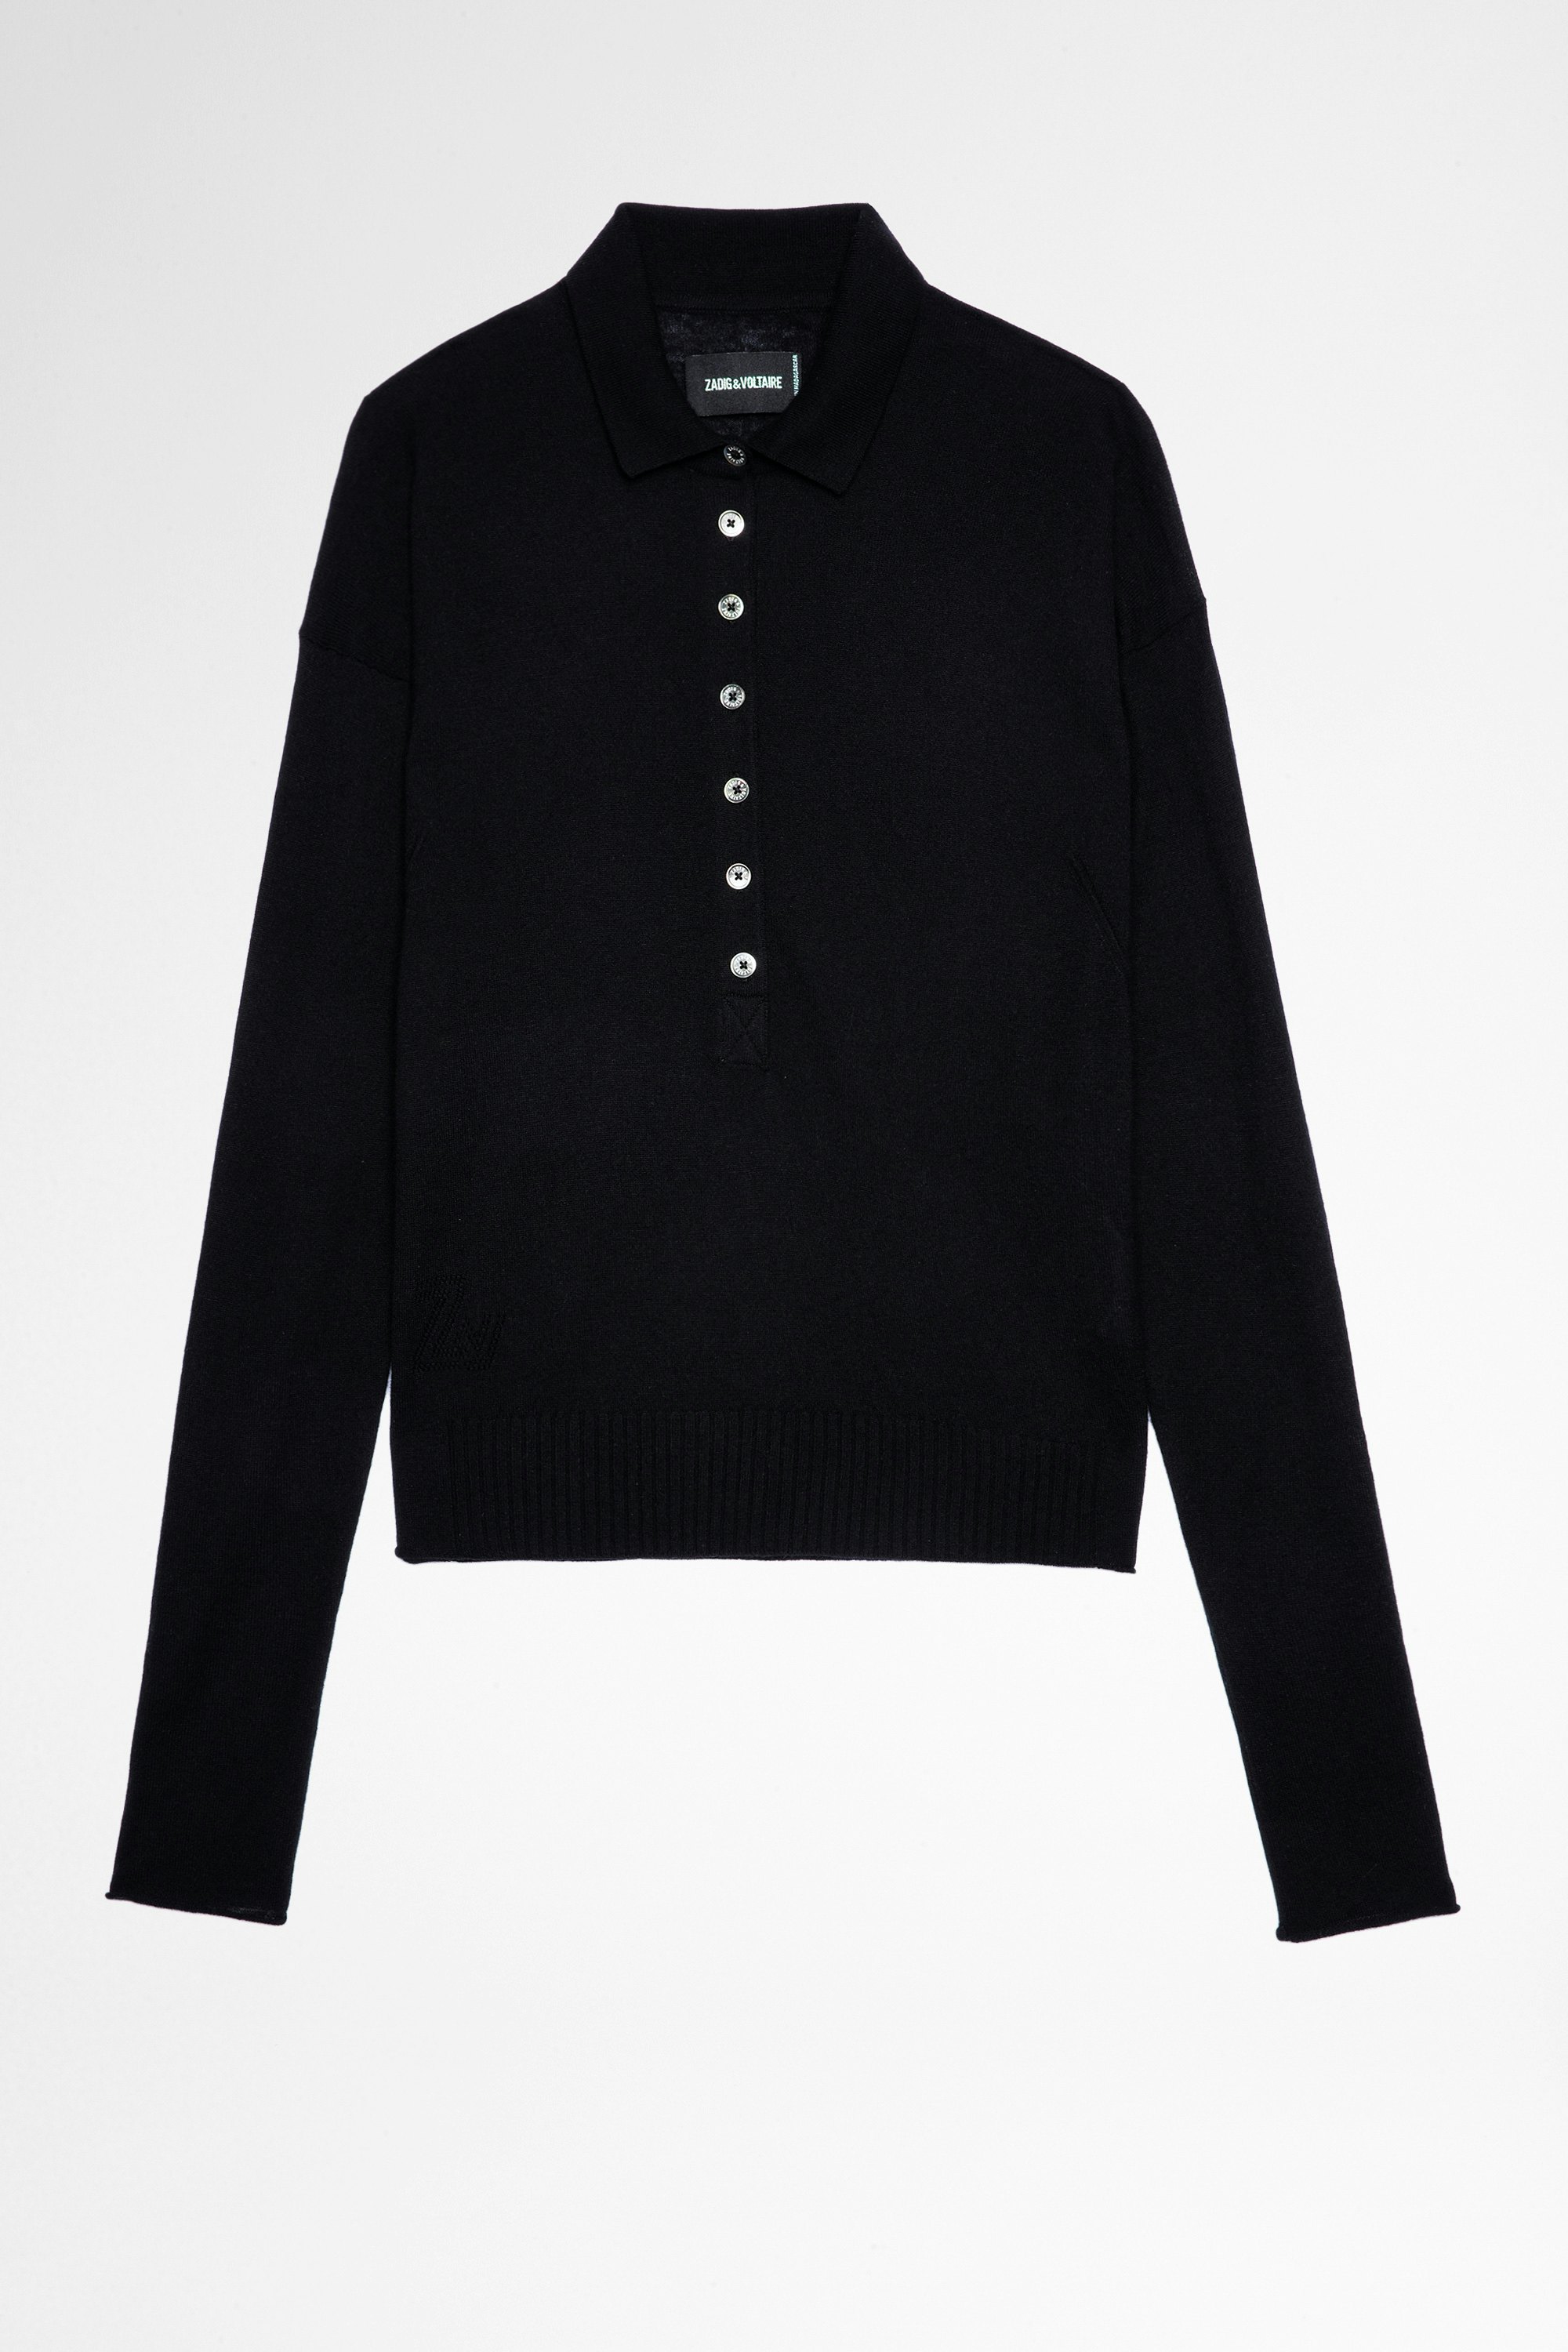 Marly Sweater Cashmere Women's black cashmere polo sweater